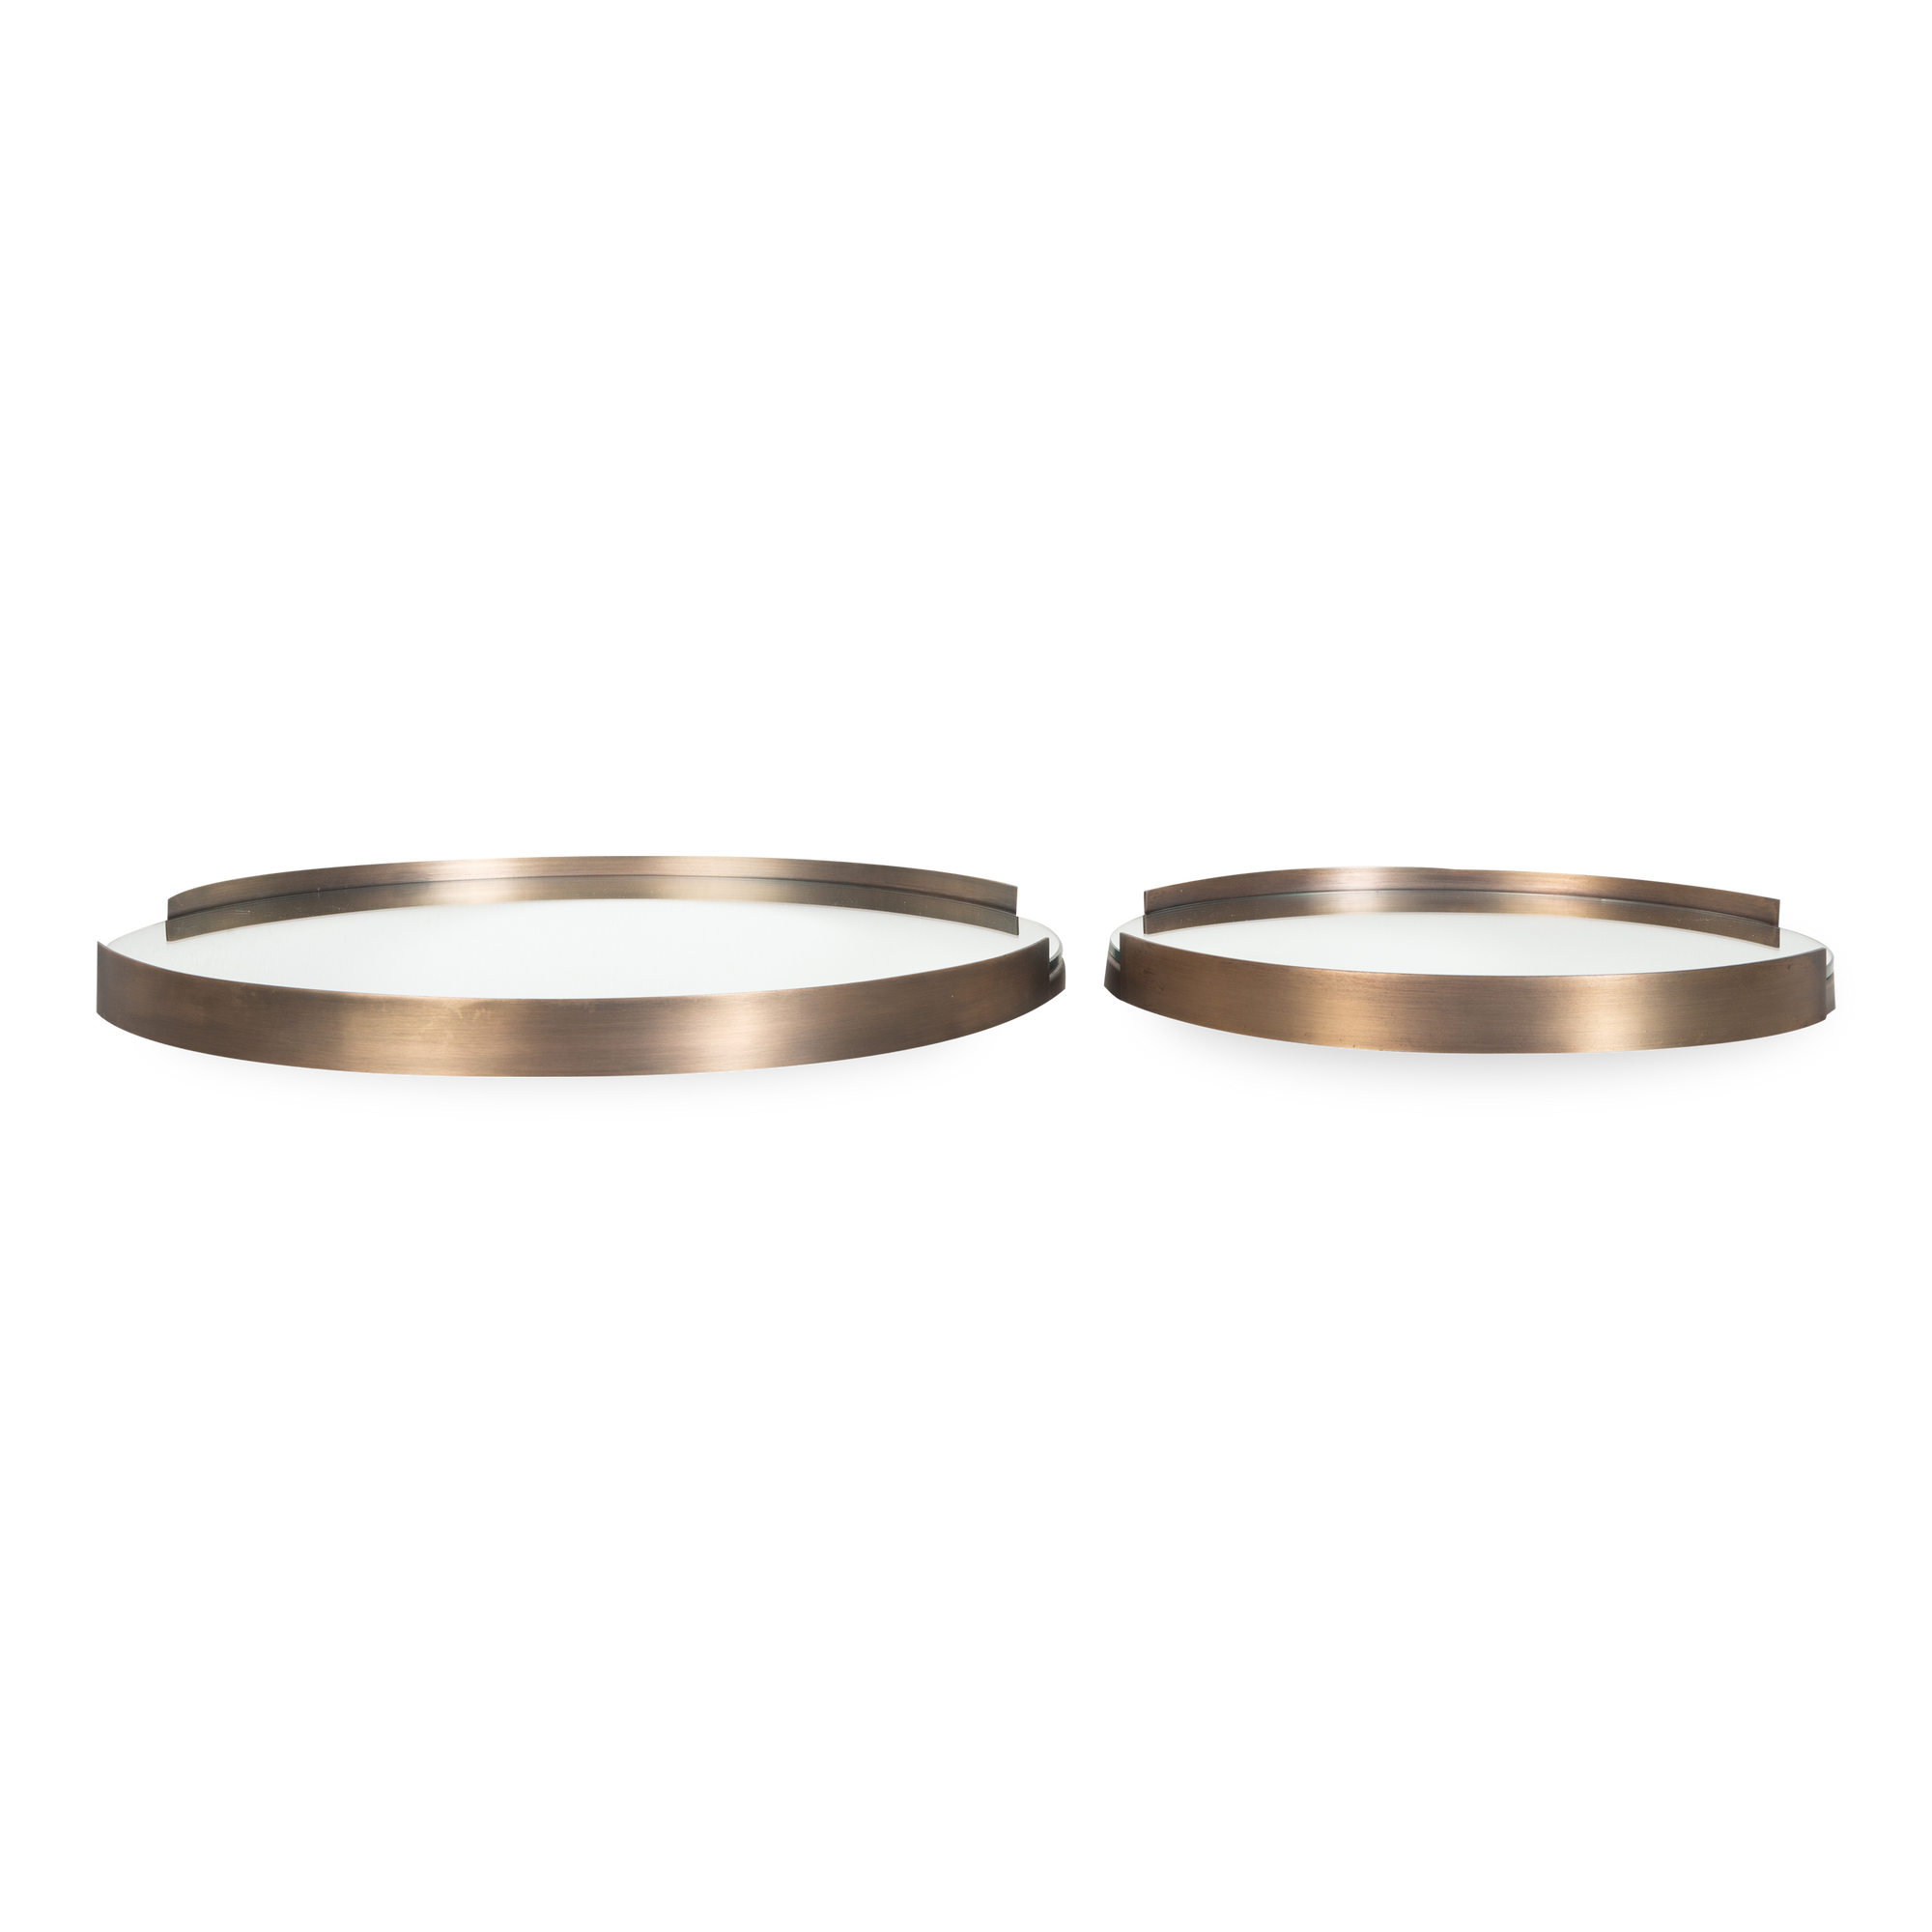 The Eve Round Tray is crafted from iron in a sleek antique brass finish.